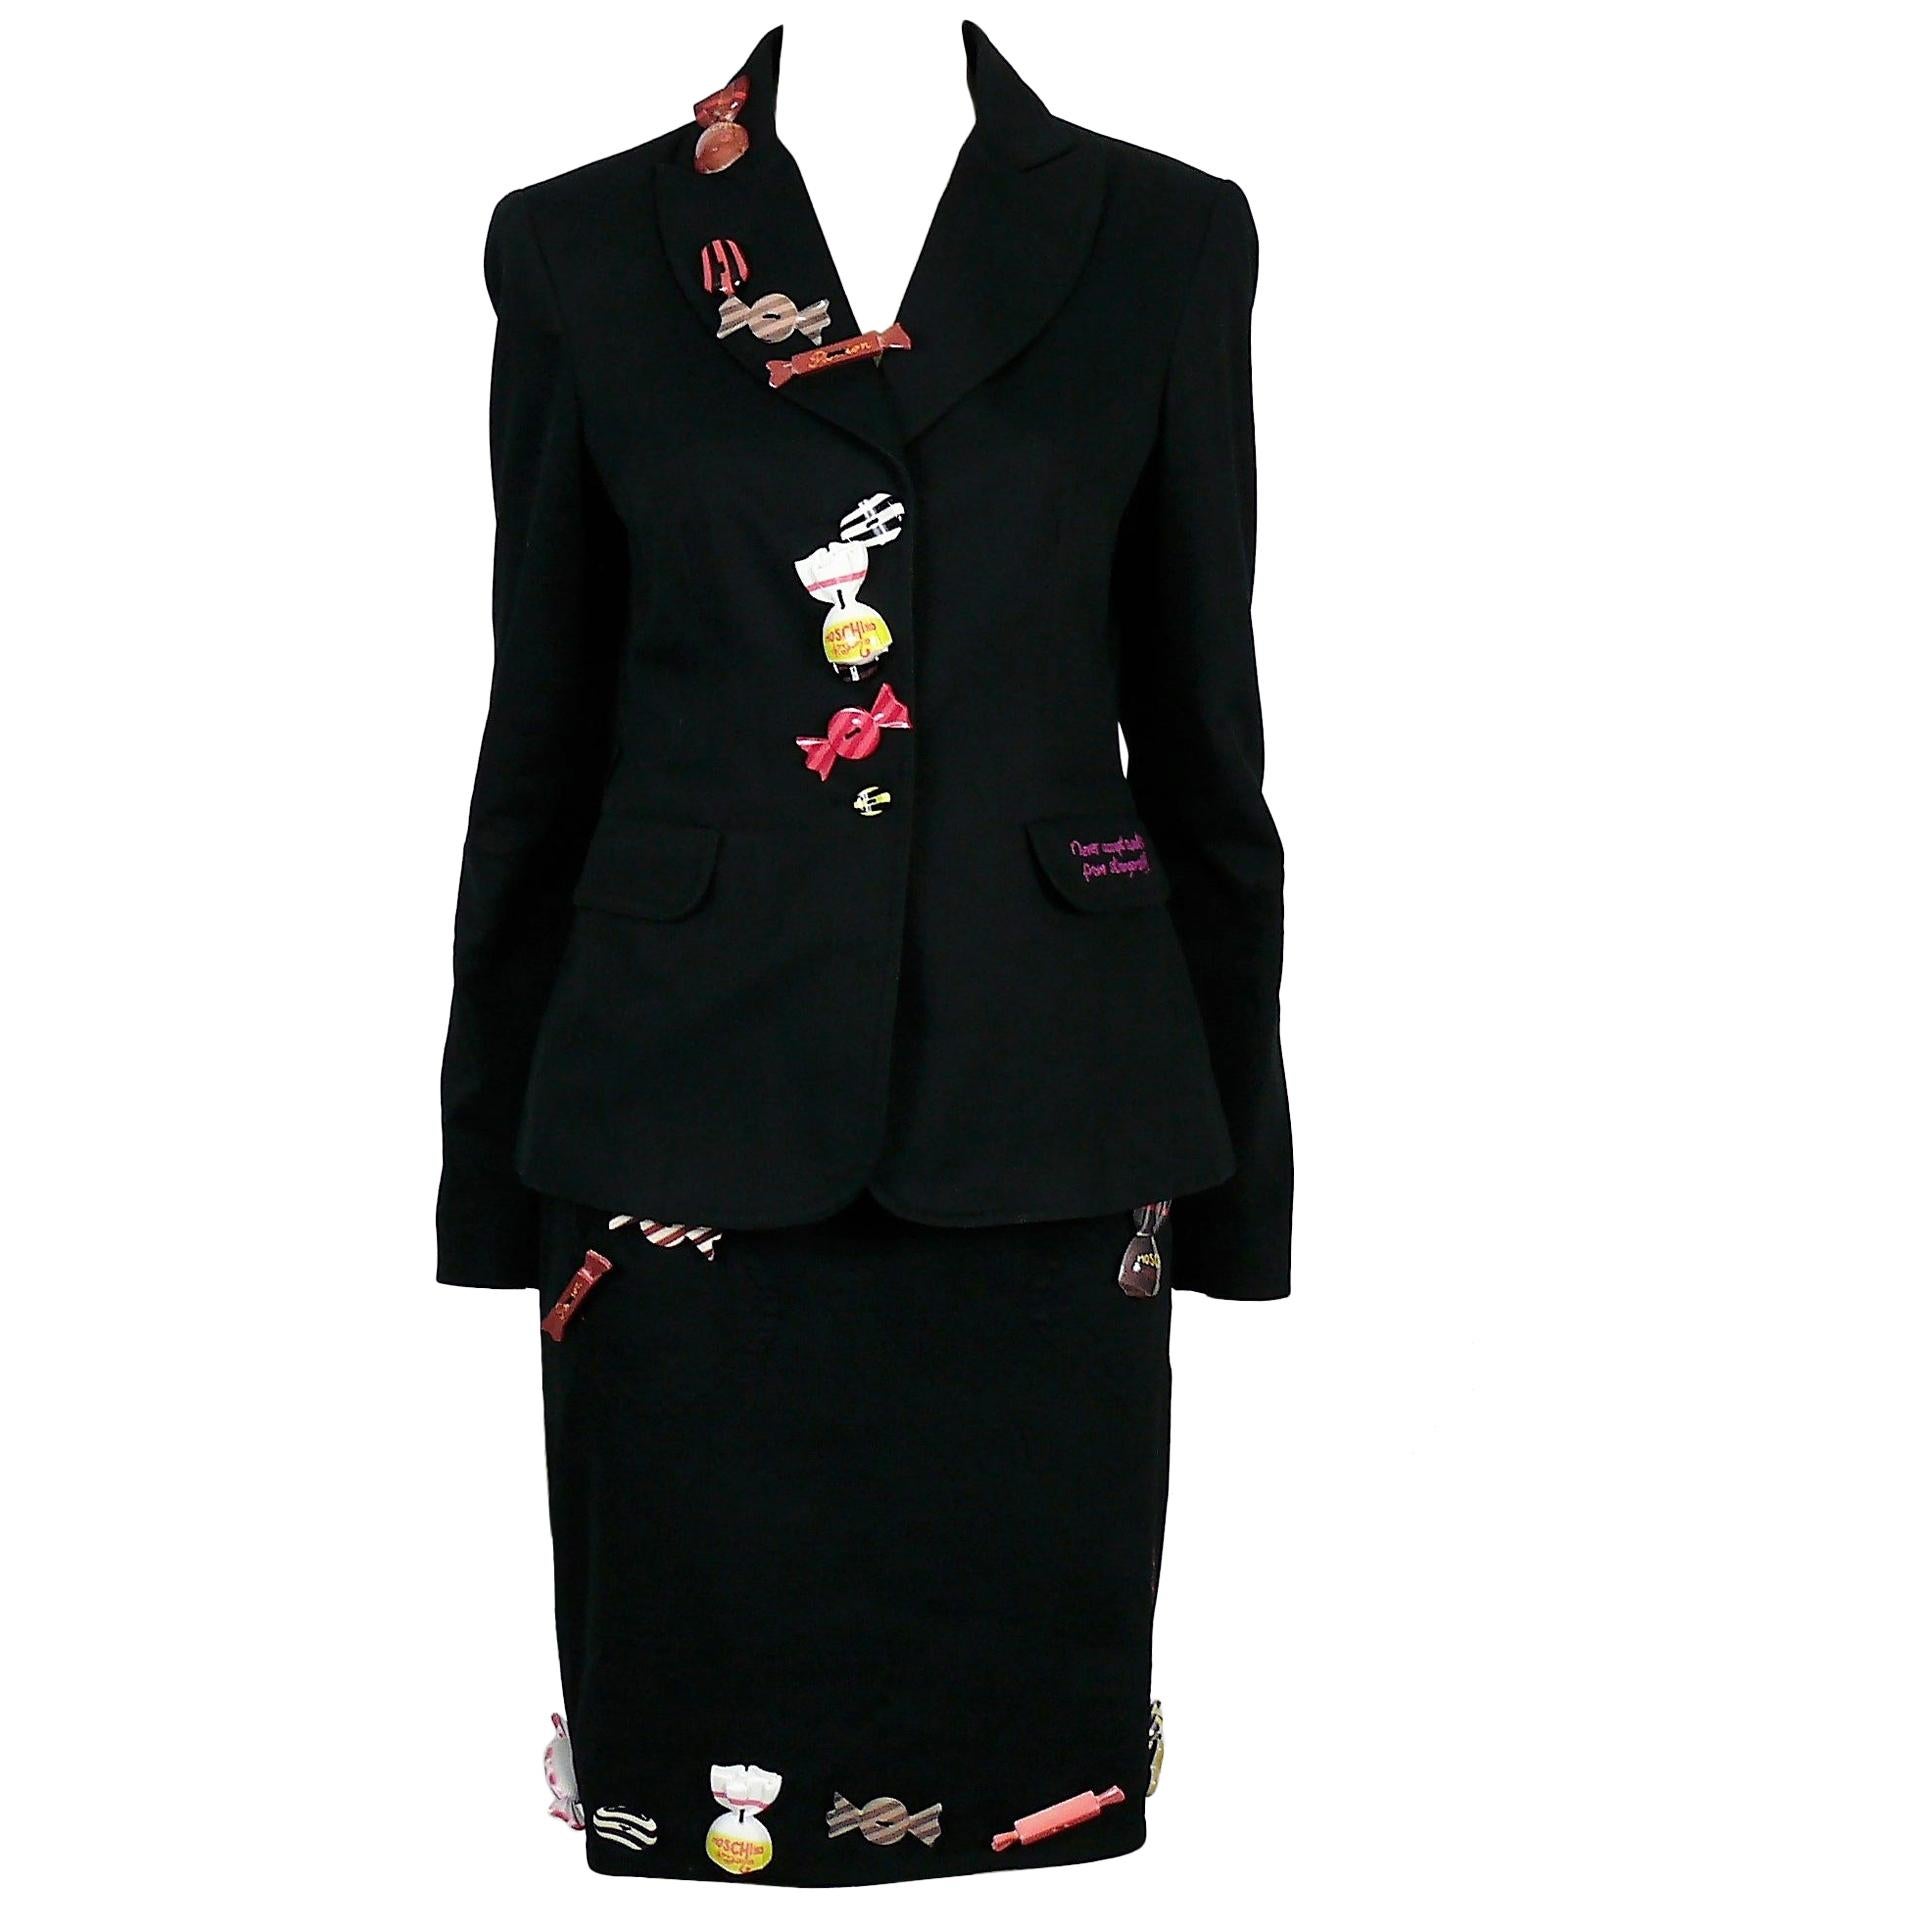 Moschino "Never Accept Sweets from Strangers" Candy Embellished Blazer and Skirt For Sale